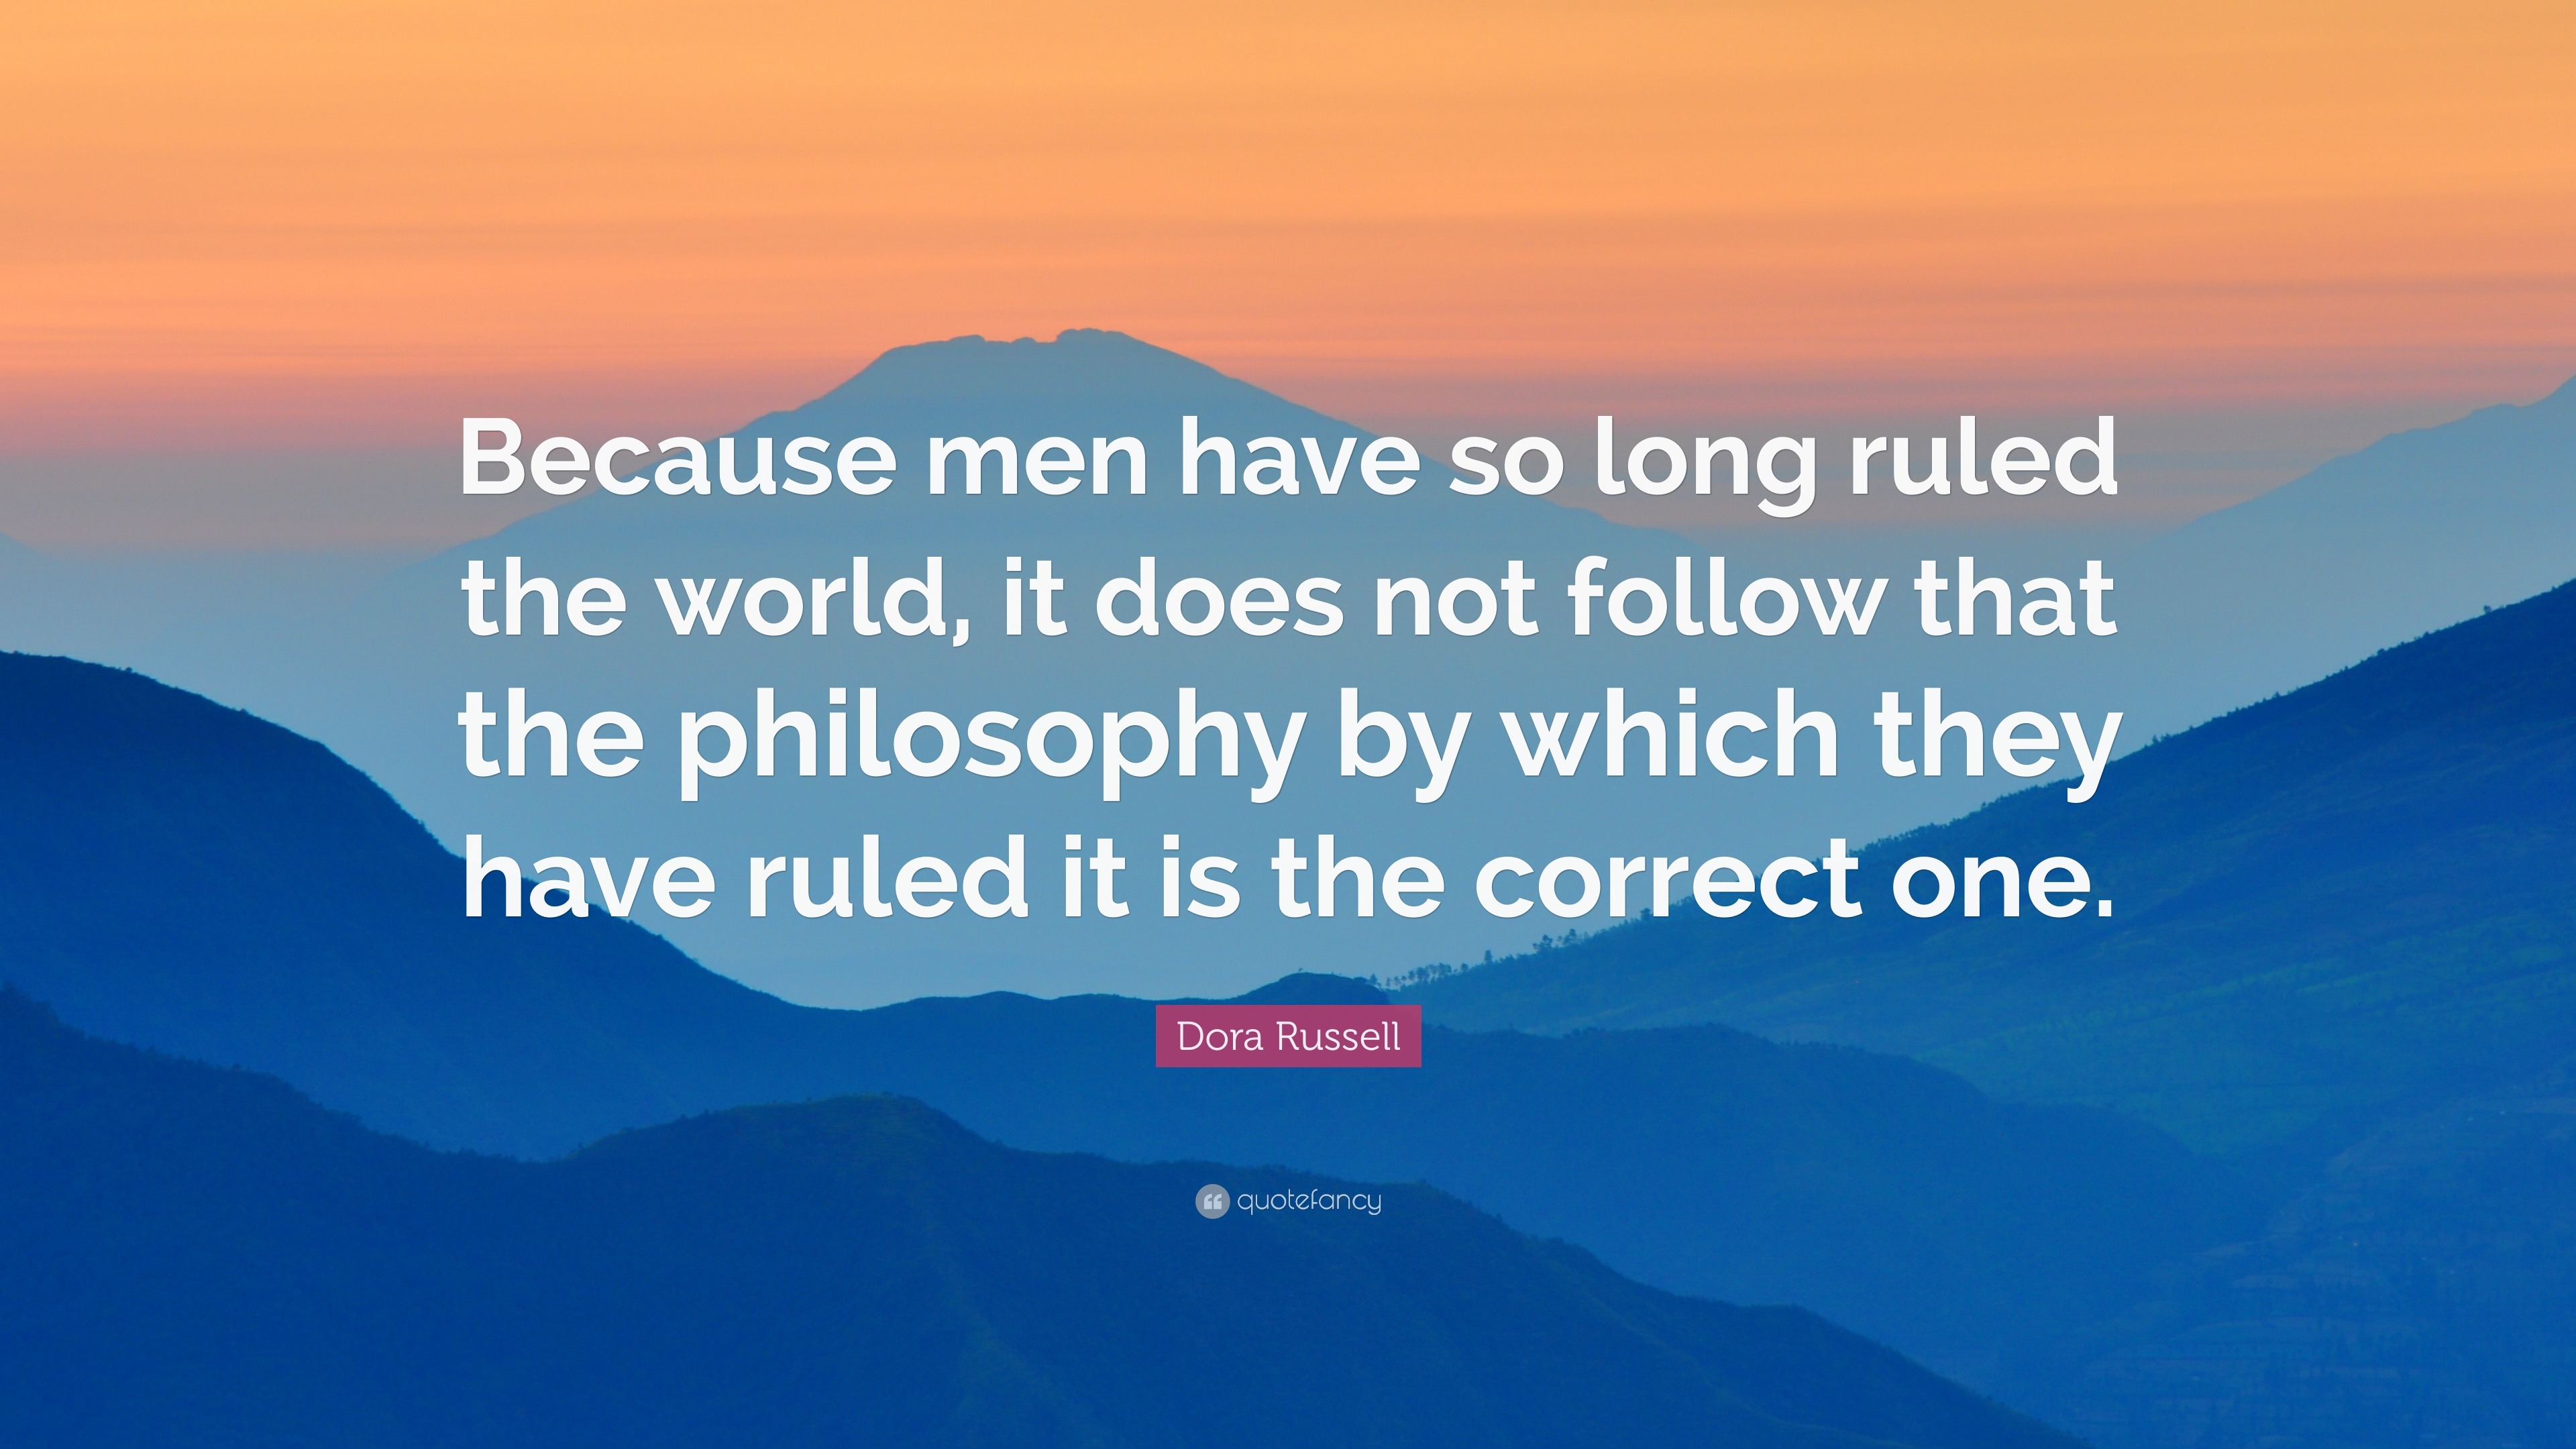 Dora Russell Quote: “Because men have so long ruled the world, it does not  follow that the philosophy by which they have ruled it is the corr...”